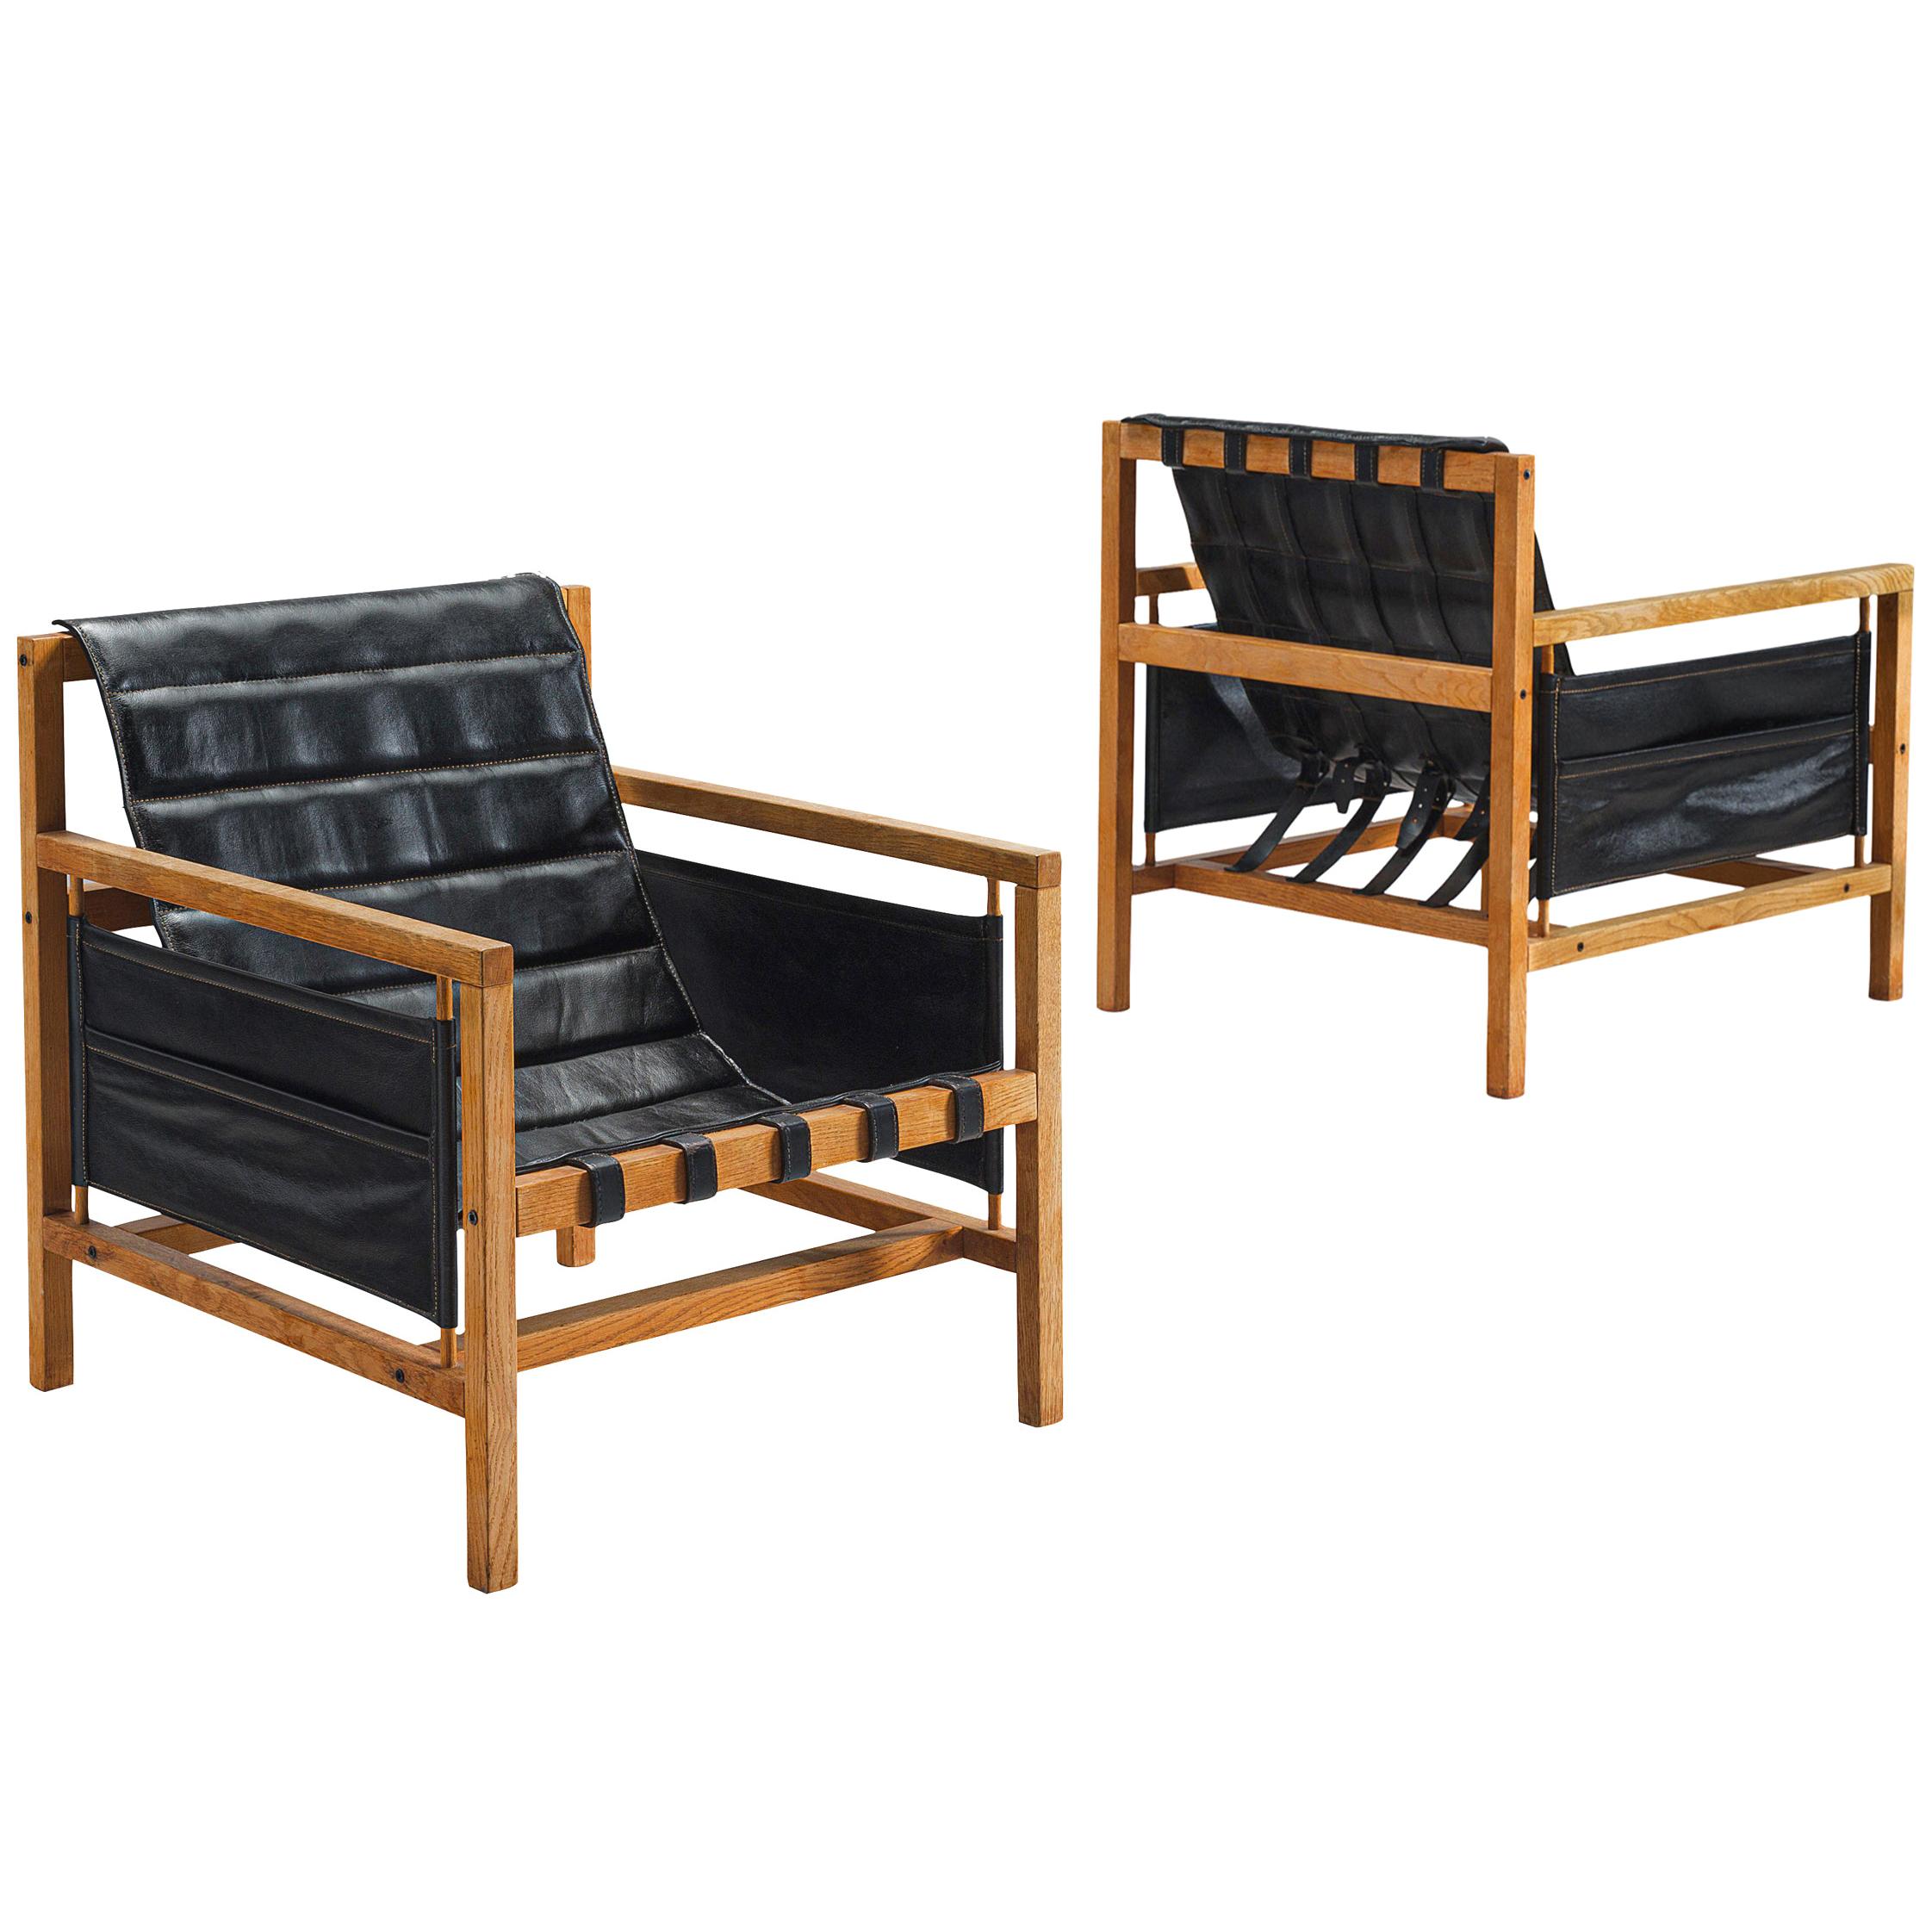 Mogens Plum & Kay Iversen for Poul Hundevad Lounge Chairs 'PH81' in Leather